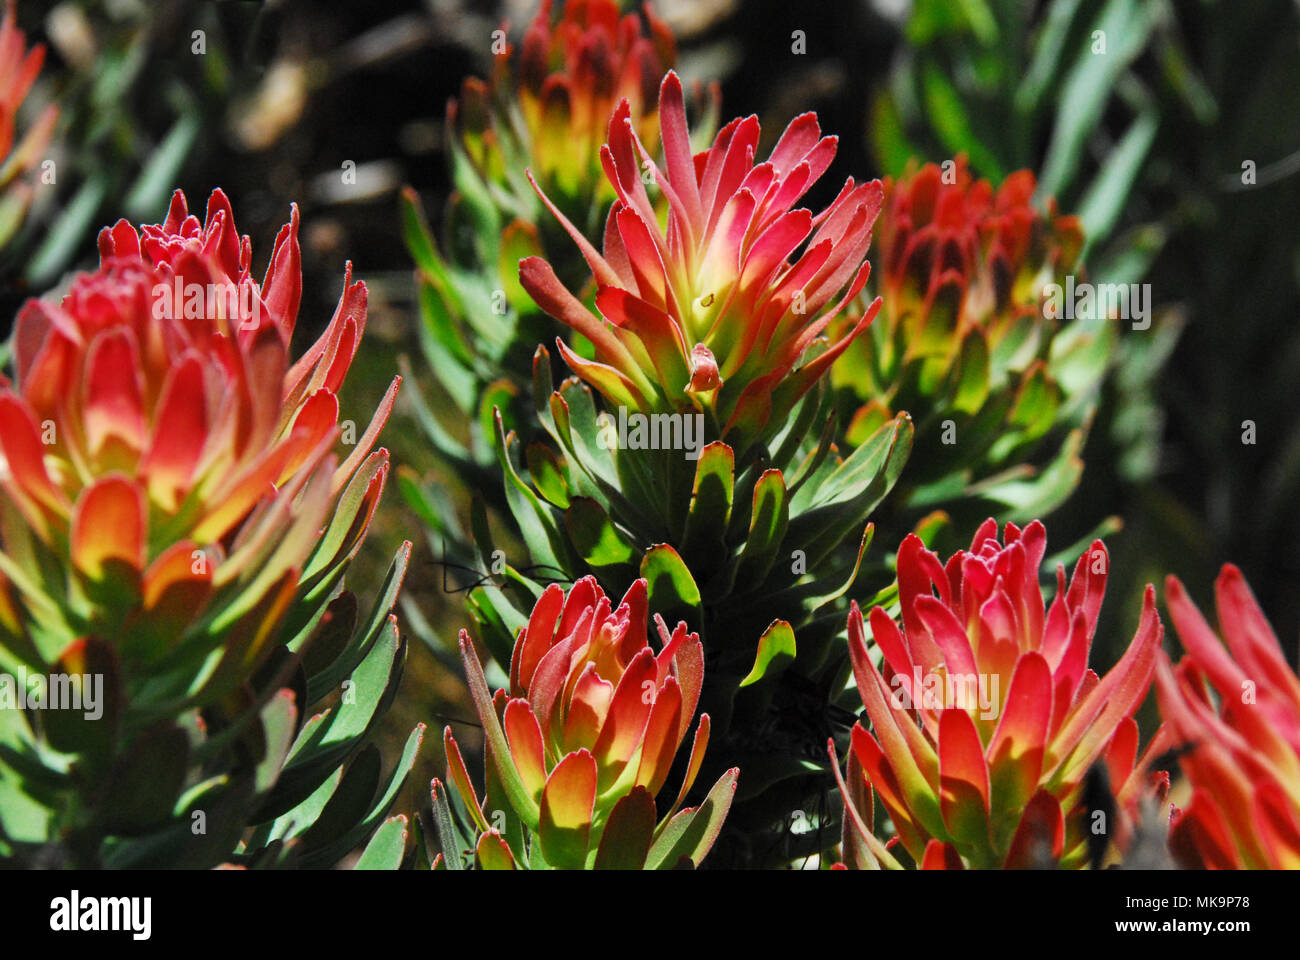 Many Protea Fynbos that thrive in the Southern part of South Africa grow no place else on Earth.  This colorful bunch is a beautiful example. Stock Photo